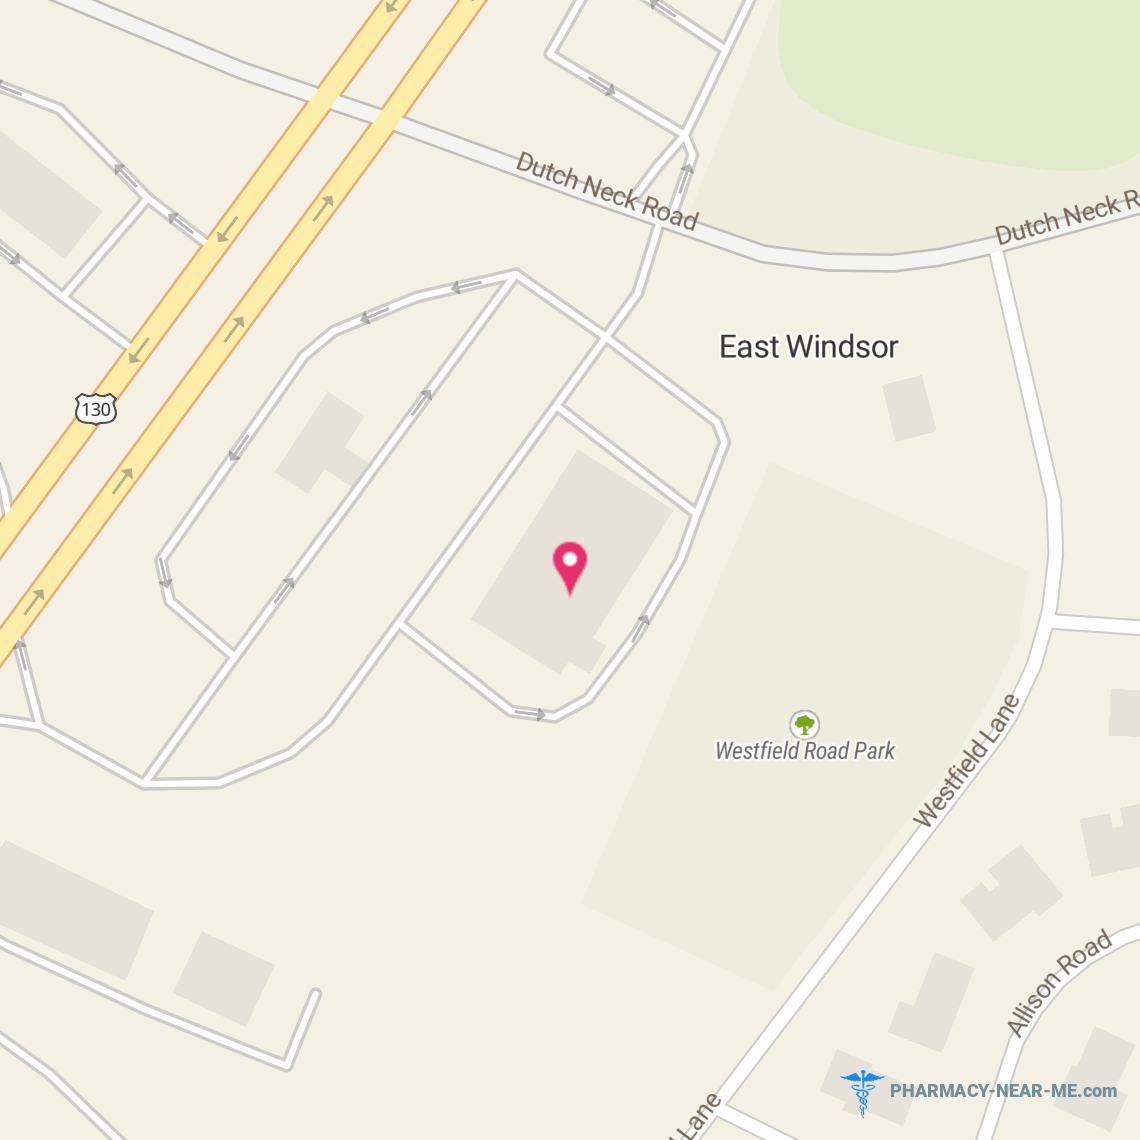 RITE AID #10495 - Pharmacy Hours, Phone, Reviews & Information: 191 Dutch Neck Road, East Windsor, New Jersey 08520, United States